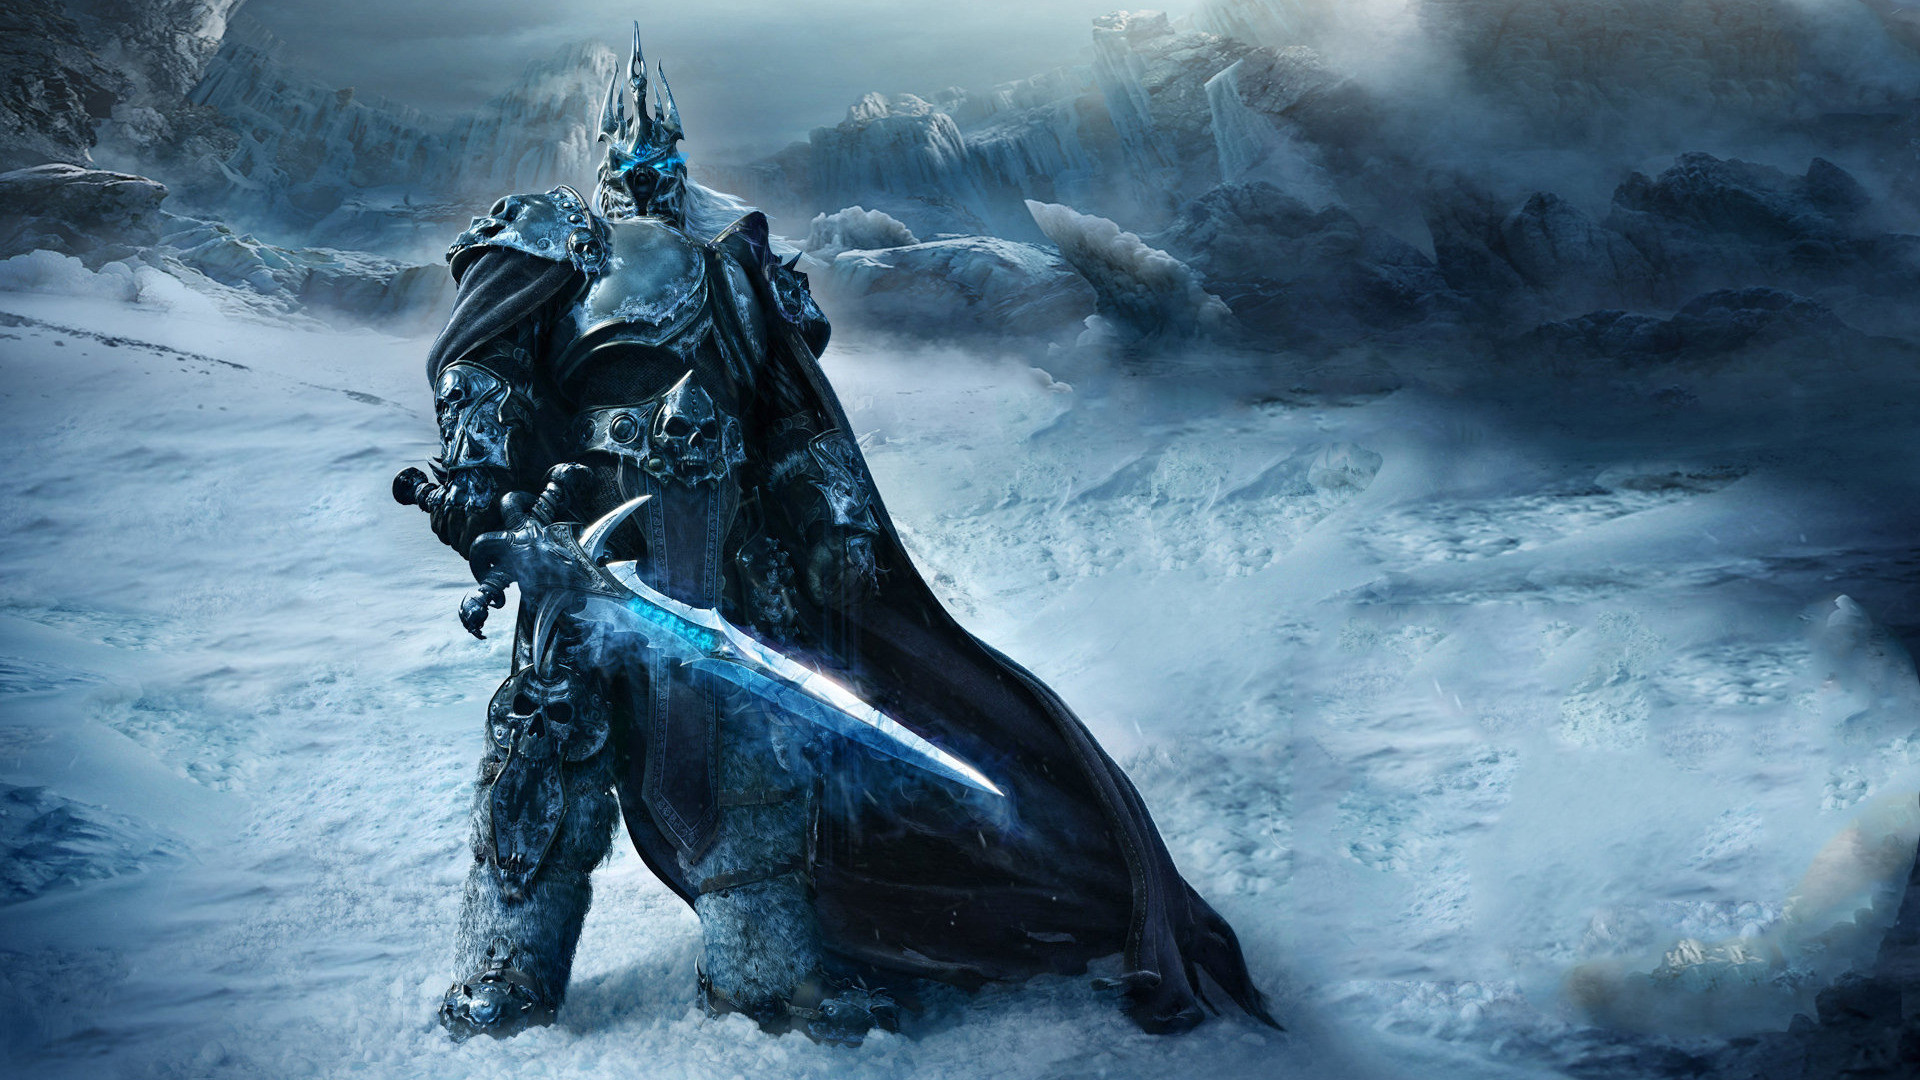 lich king animated wallpaper,cg artwork,digital compositing,fictional character,photography,space